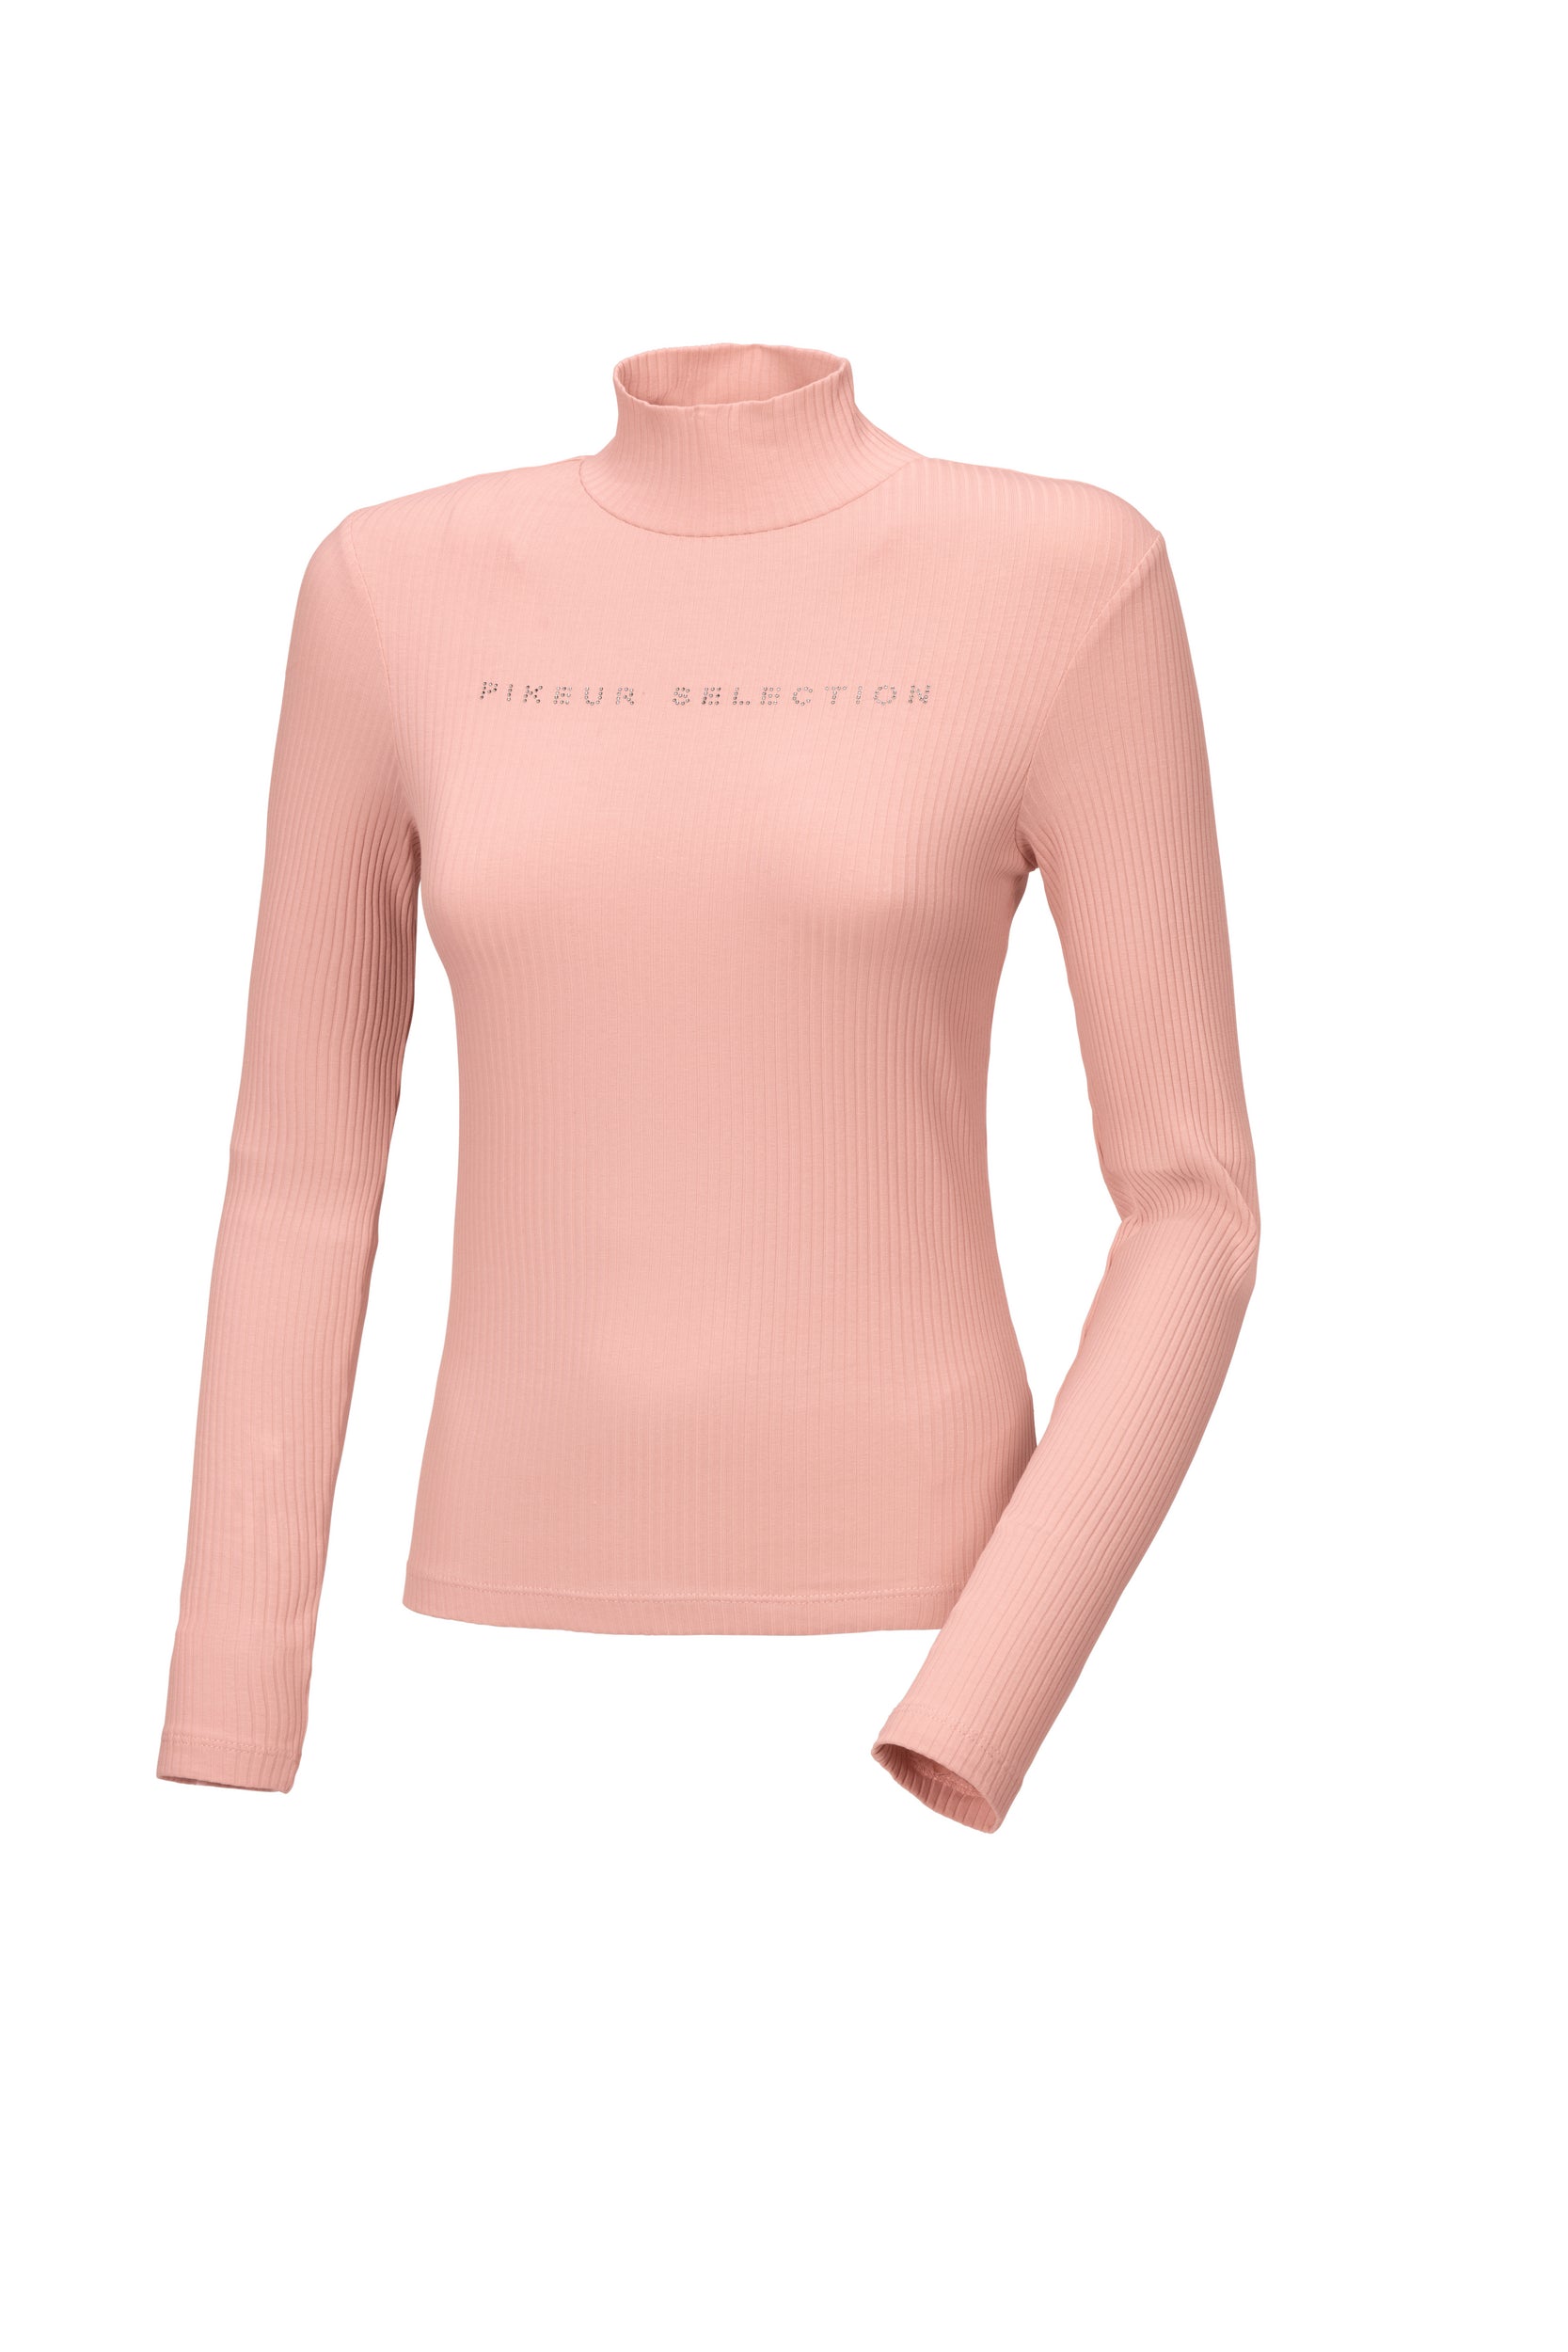 Pikeur roll neck top in Powder rose